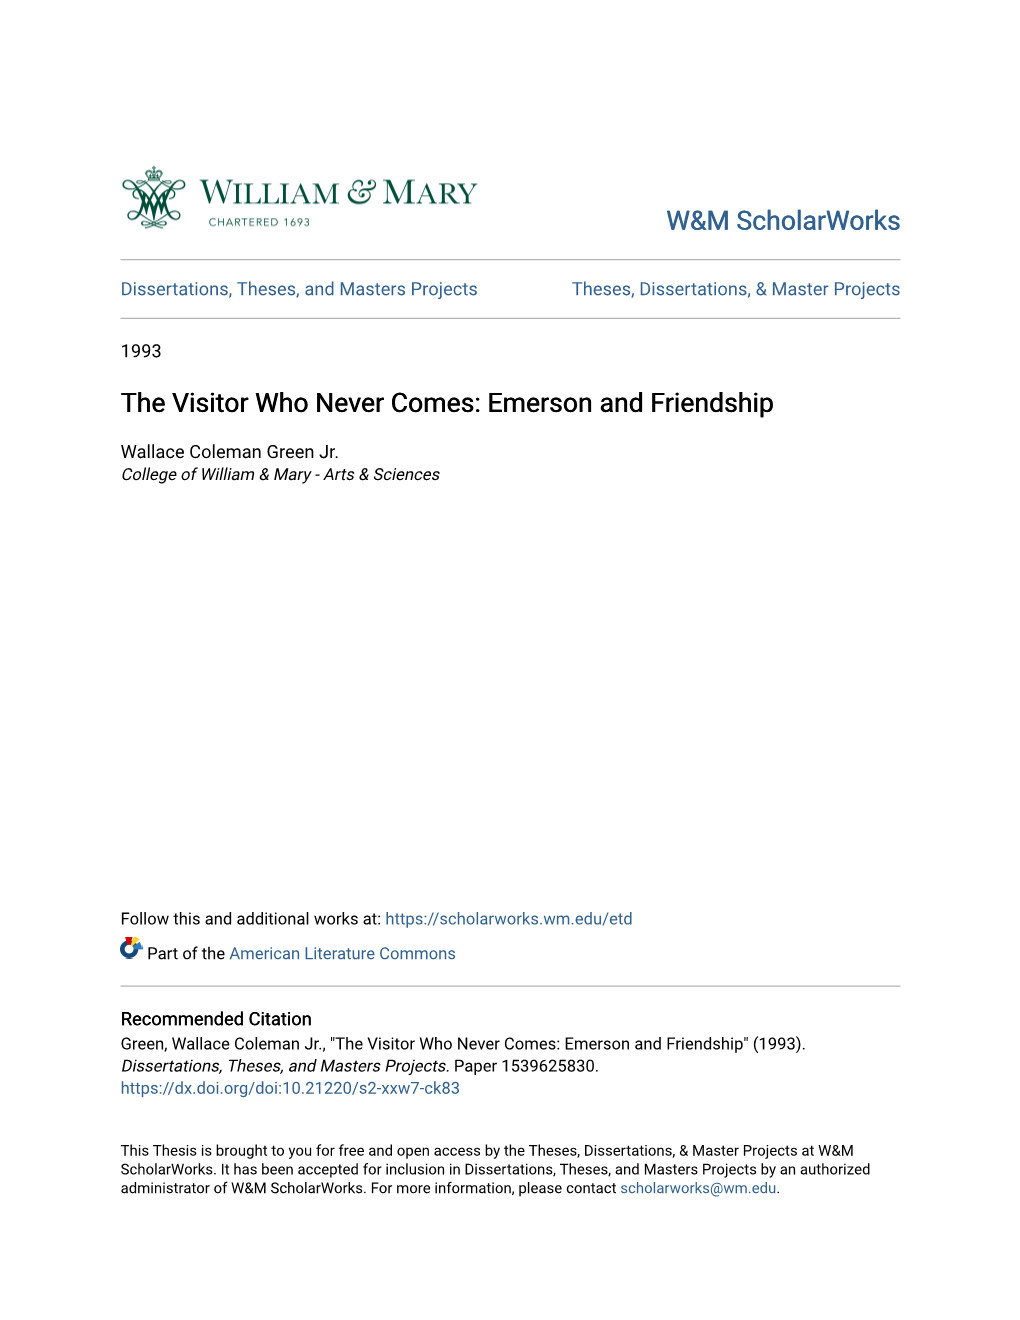 The Visitor Who Never Comes: Emerson and Friendship